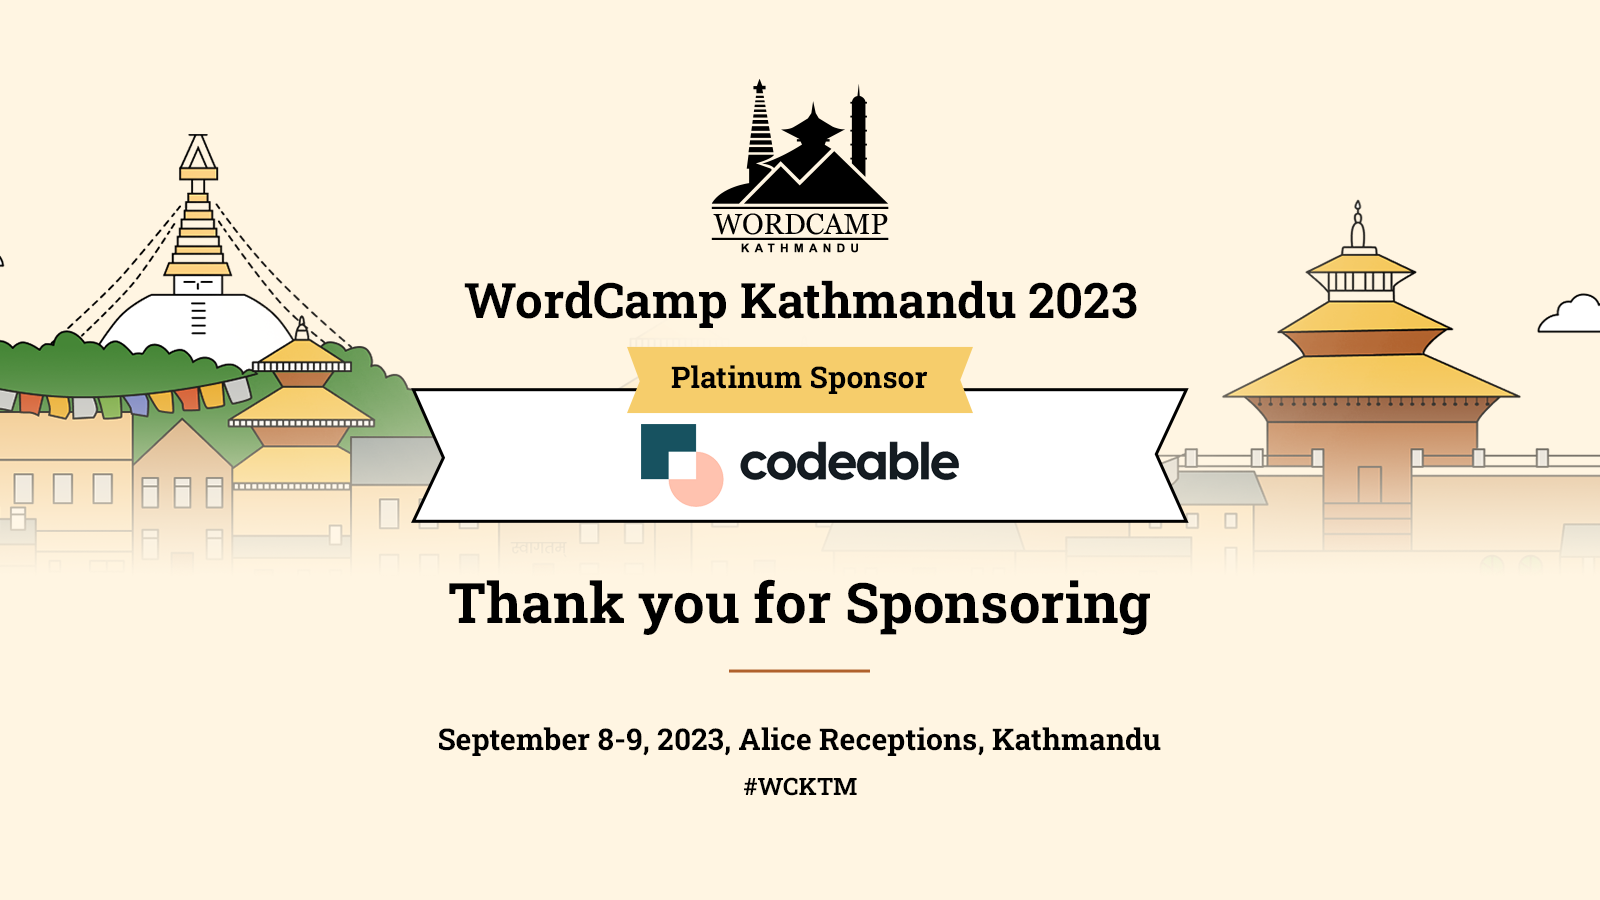 Thank you Codeable for sponsoring